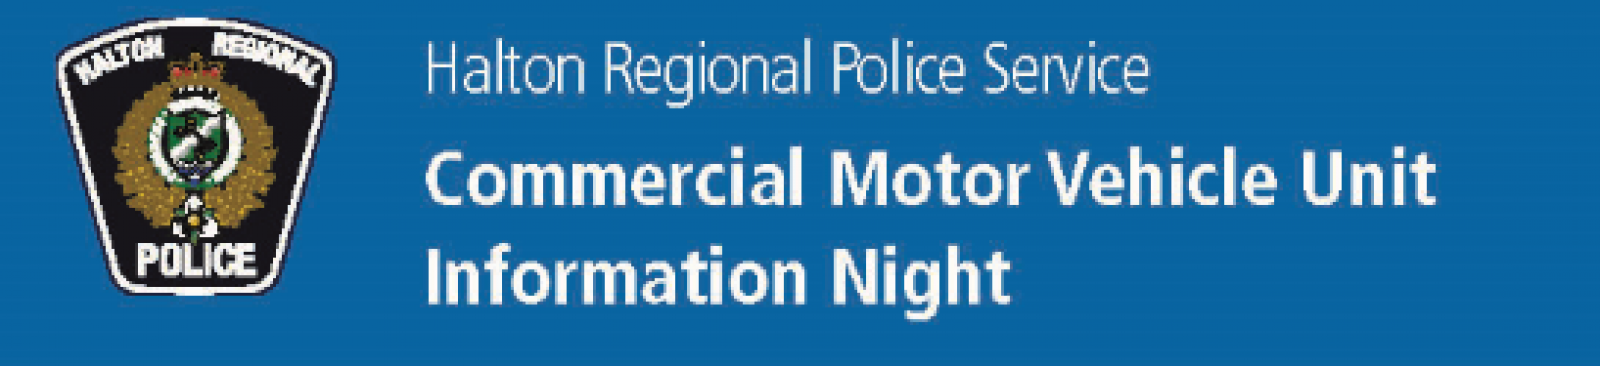 Commercial vehicle safety information night